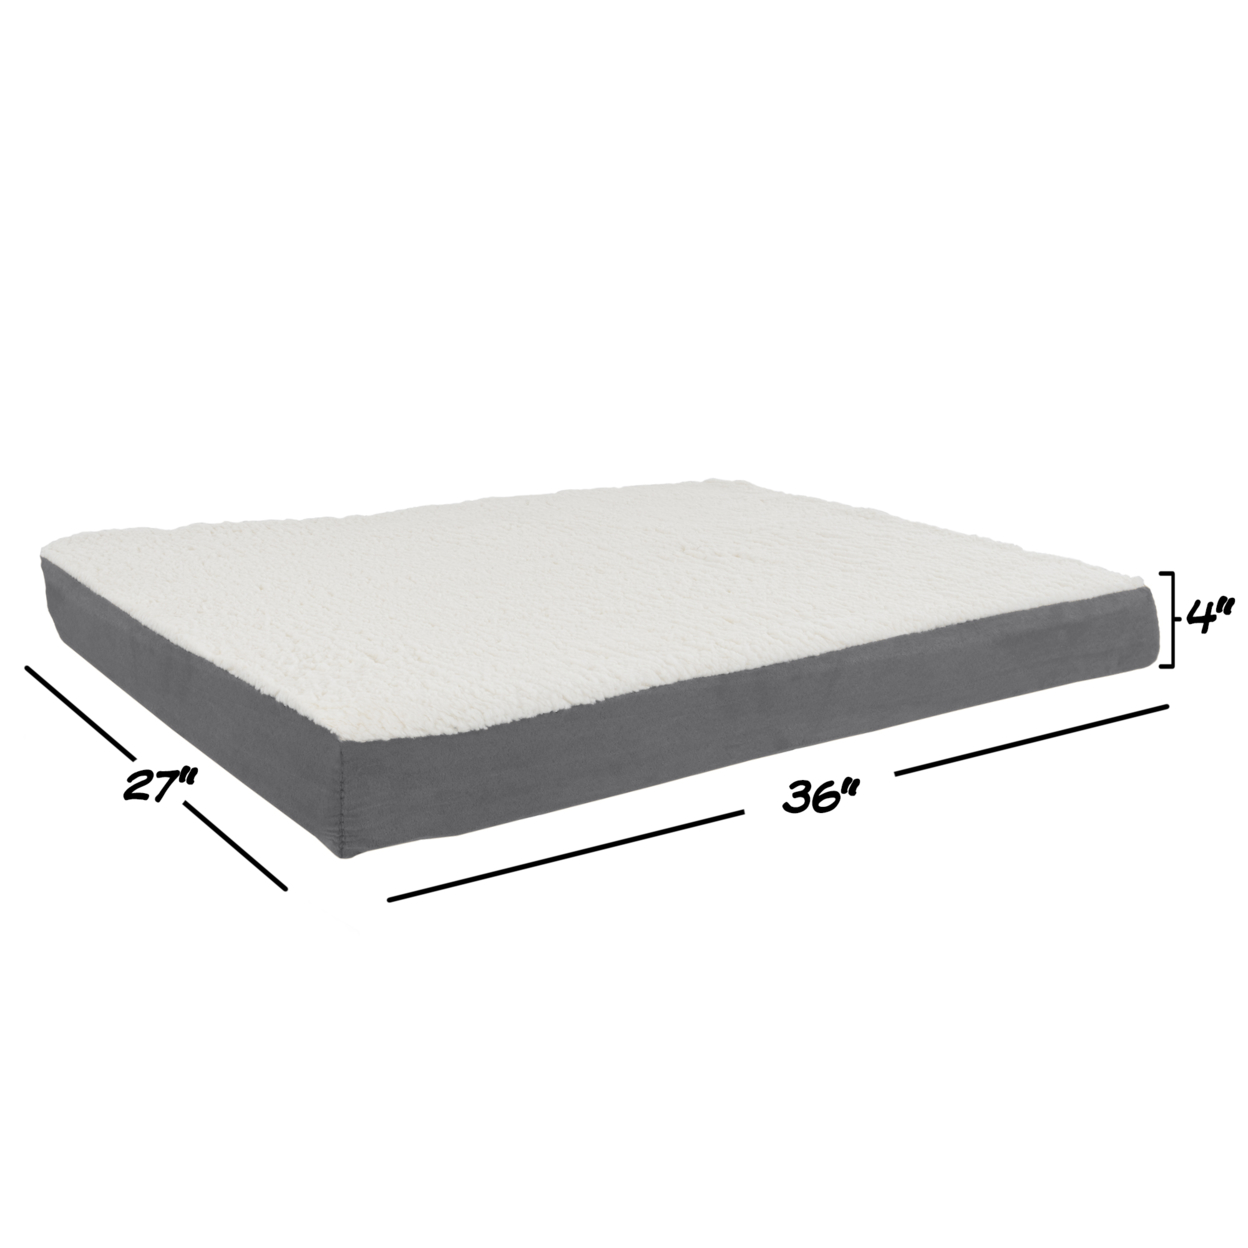 Orthopedic Sherpa Top Pet Bed With Memory Foam And Removeable Cover 36 X 27 X 4 Gray Large